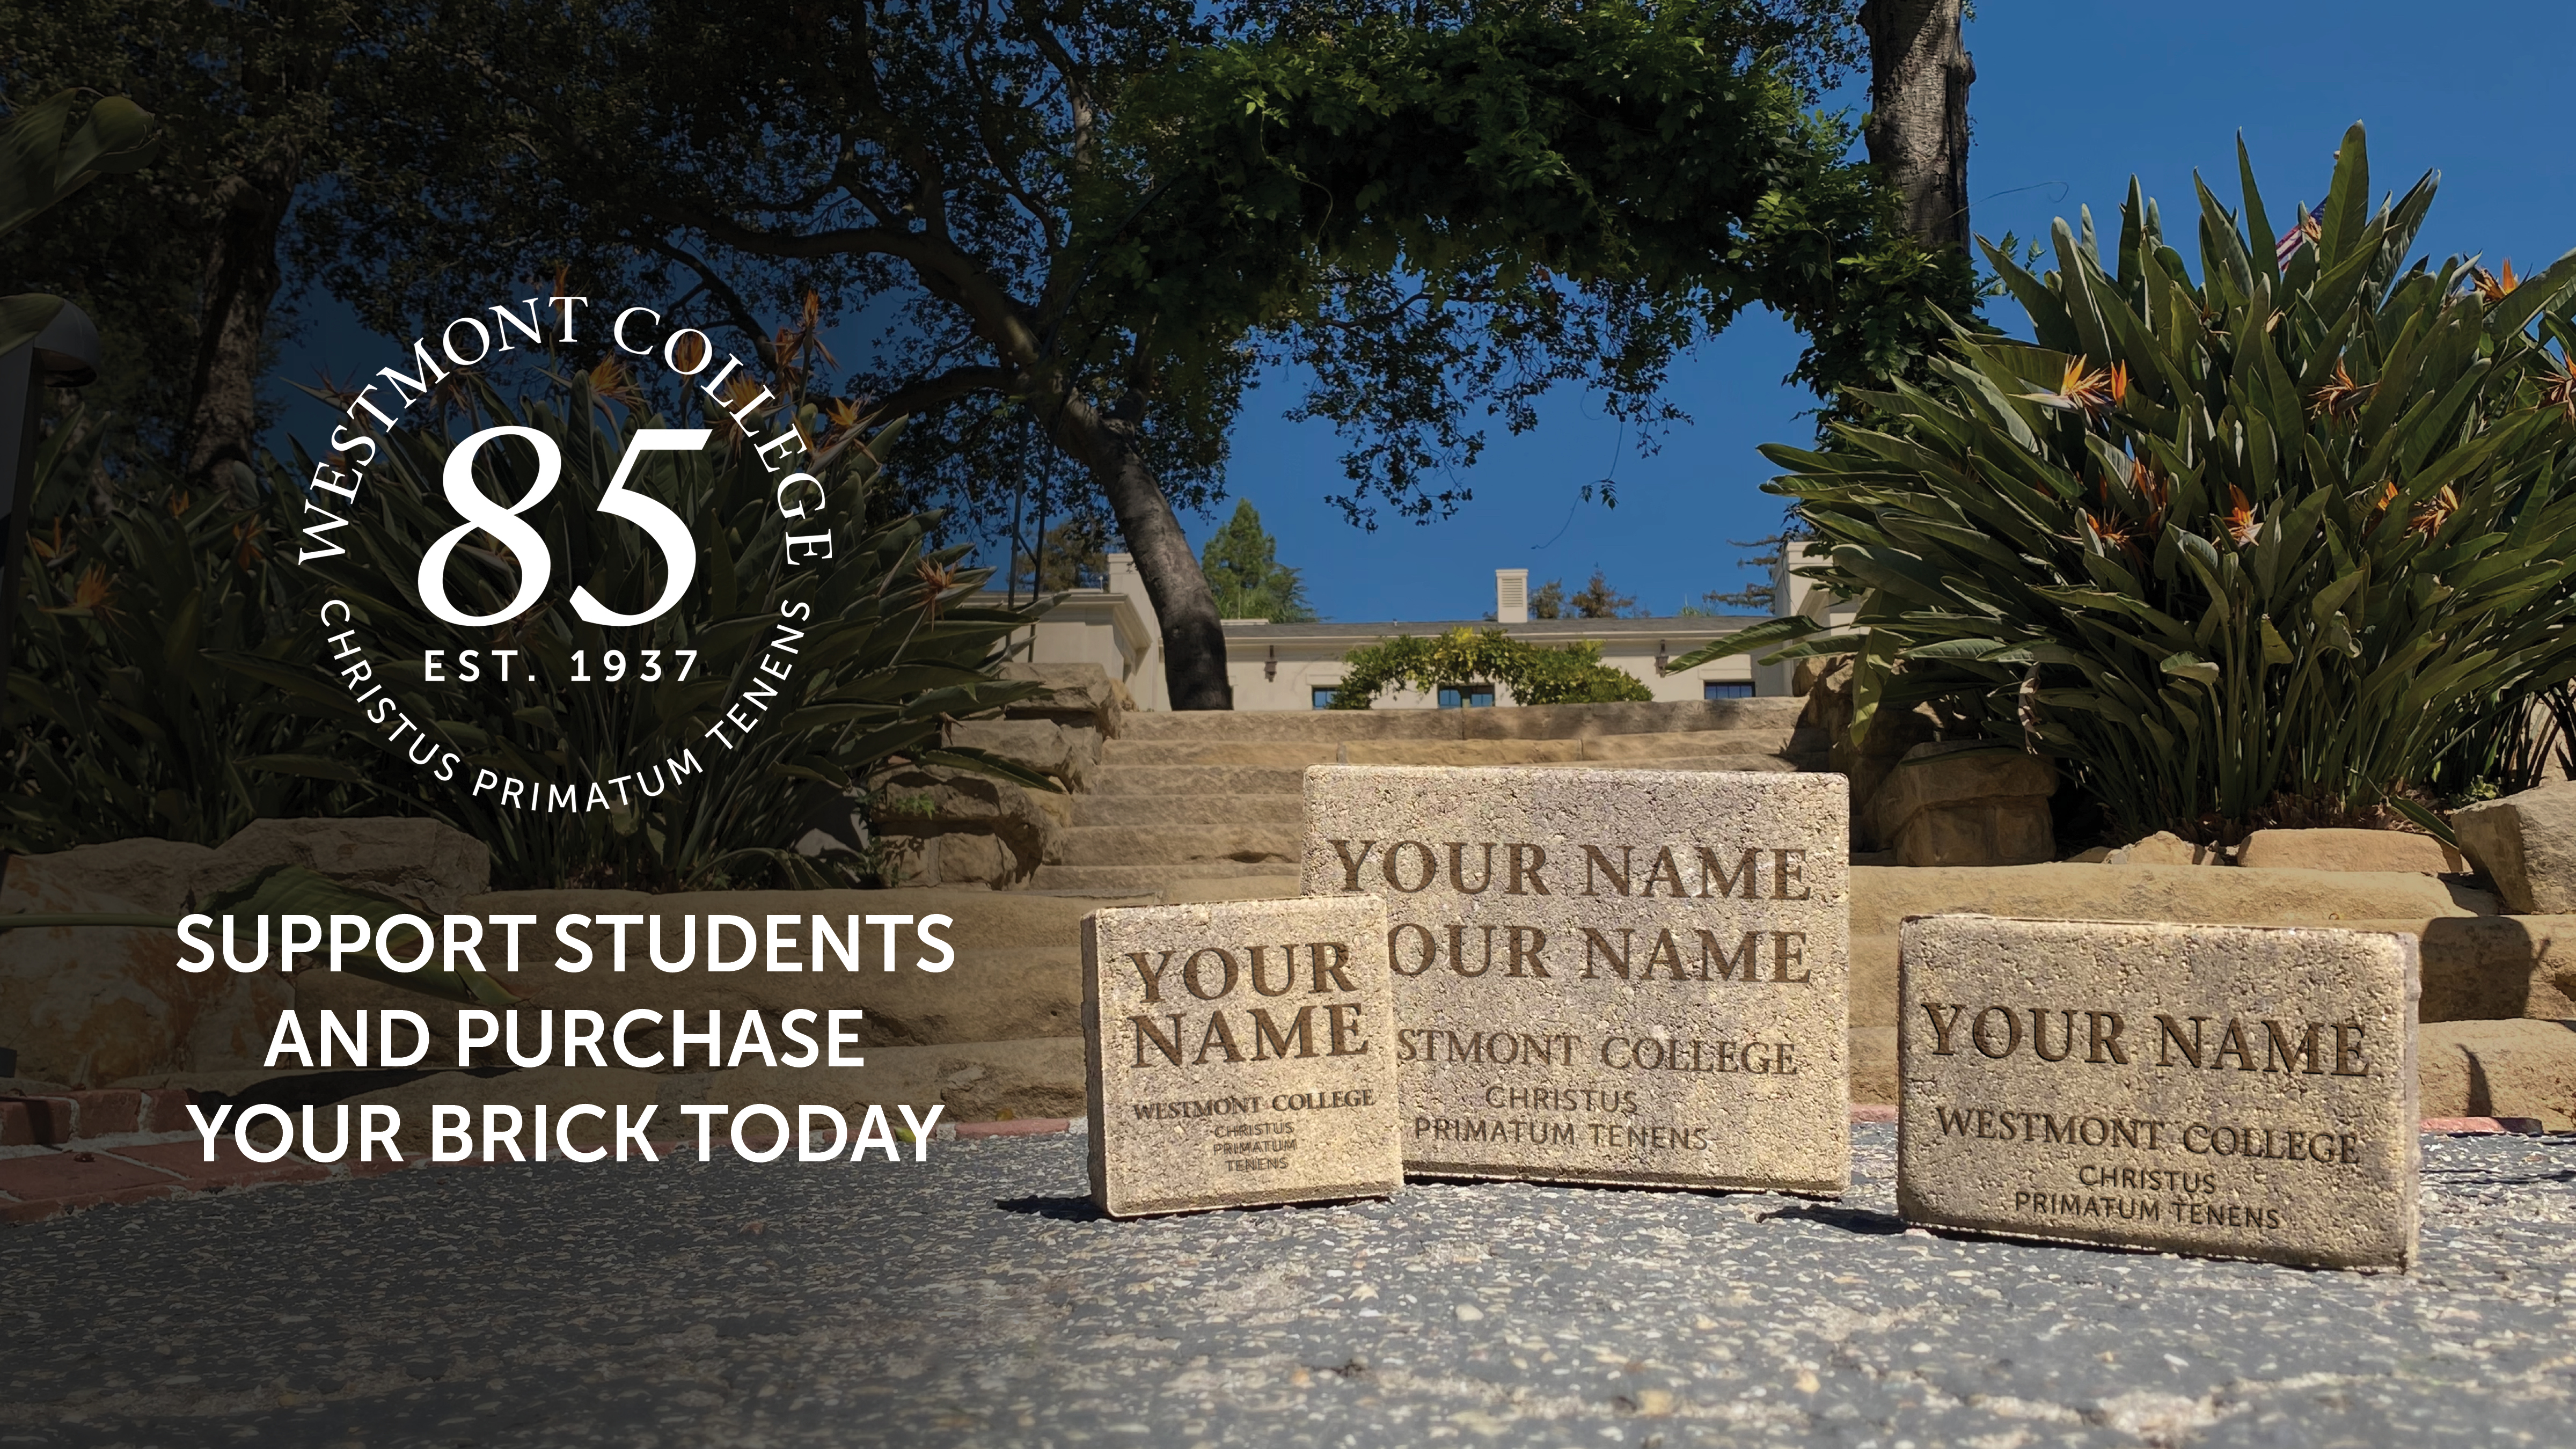 Support Students and Purchase Your Brick Today